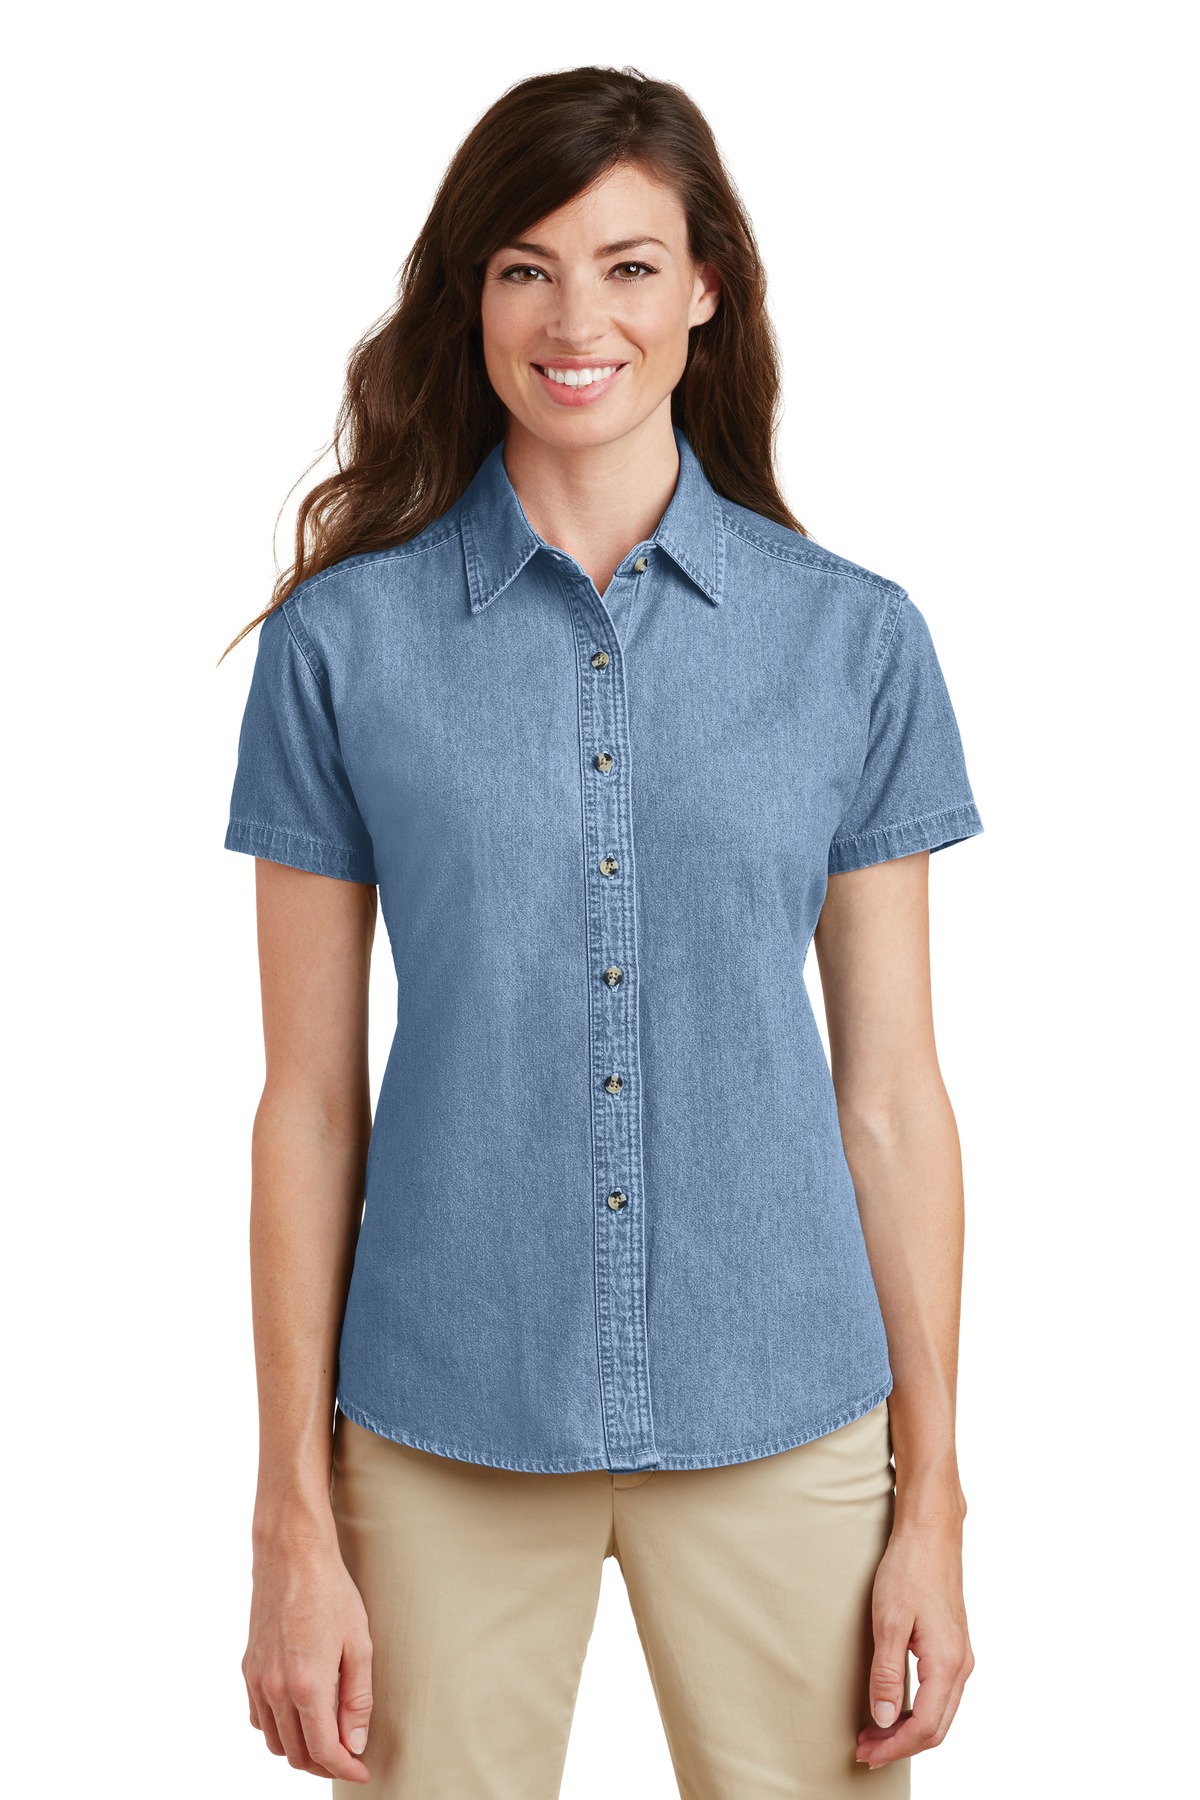 Spartan || Women's Denim T-Shirt | SpartanxNation T-Shirts And Clothing  Accessories